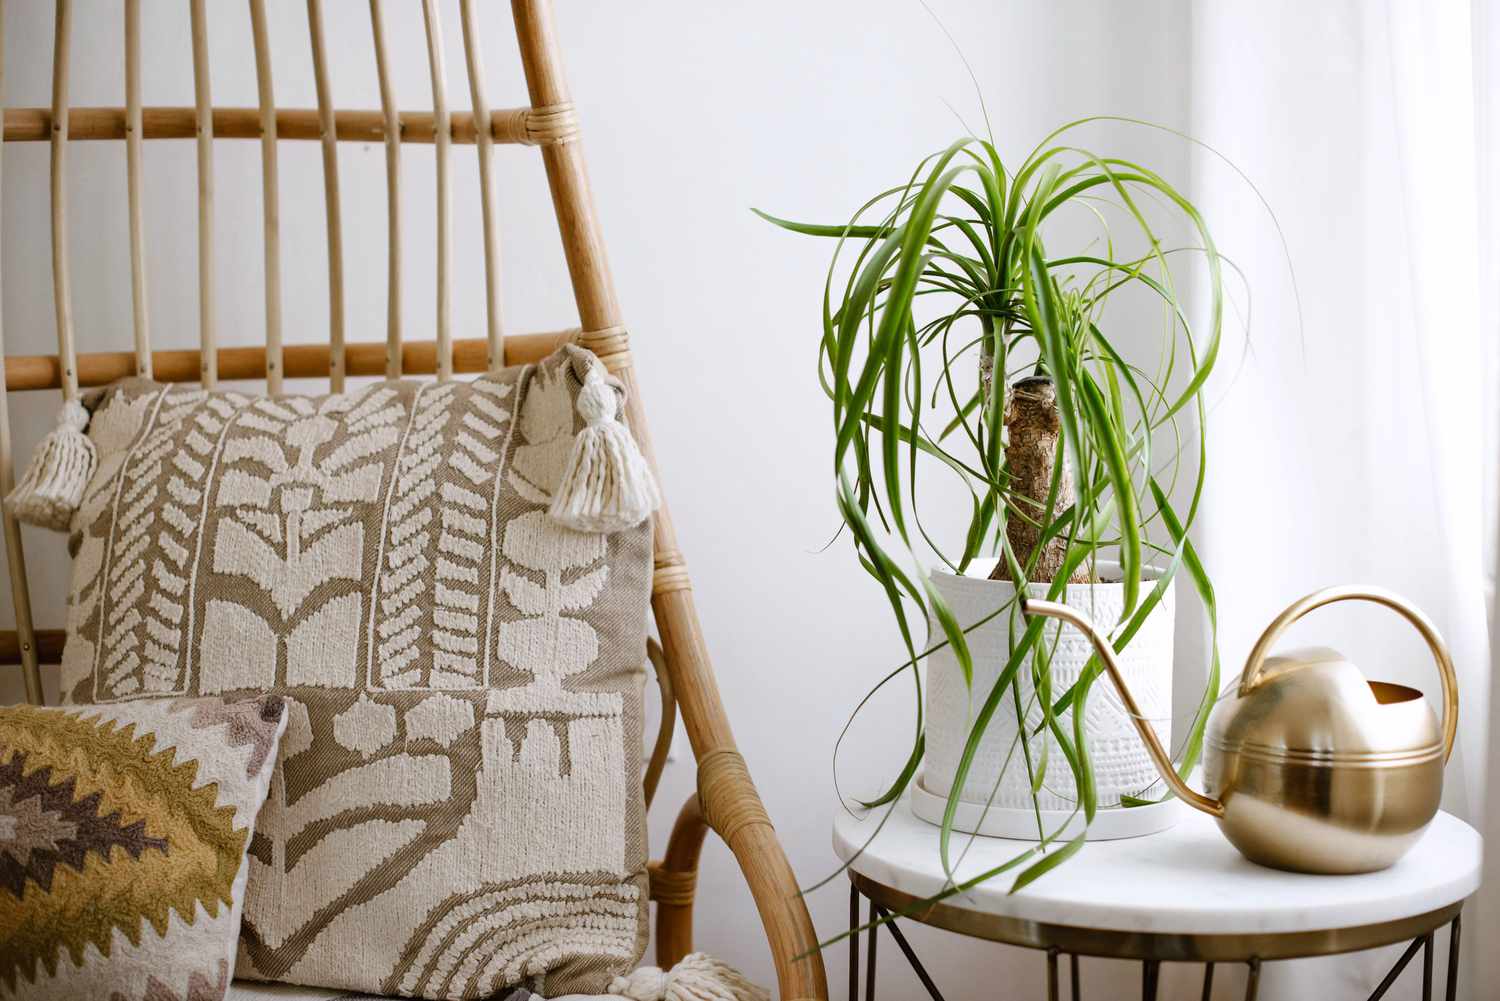 Ponytail palm in white pot with long wispy fronds next to gold watering can and patterned pillows